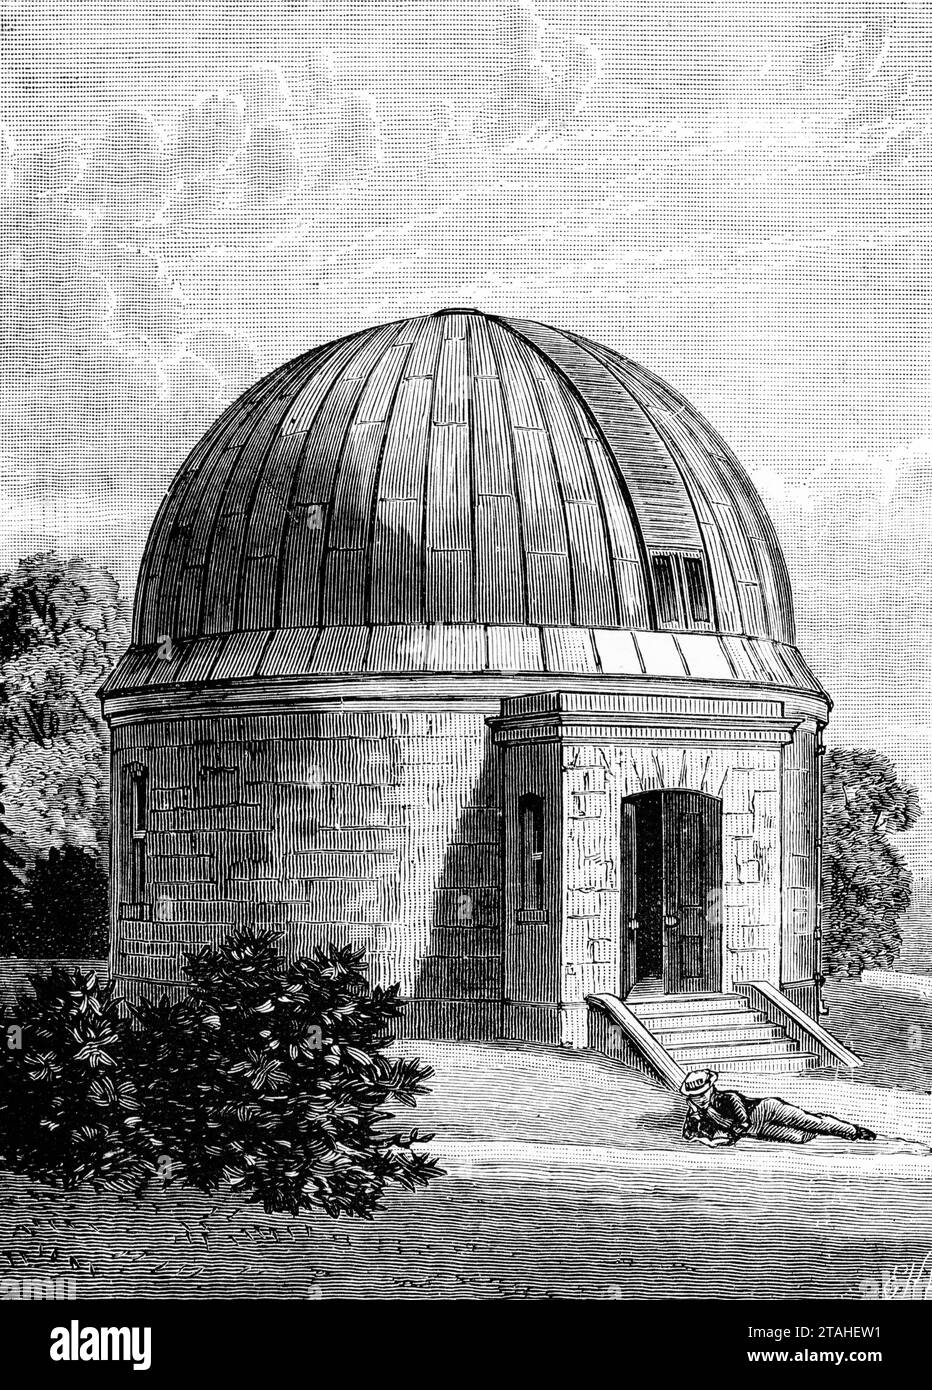 The South Dome of the Dunsink Observatory, Ireland, c1889. The observatory houses the South Telescope. This is a refracting telescope built by Thomas Grubb of Dublin, and completed in 1868. Stock Photo